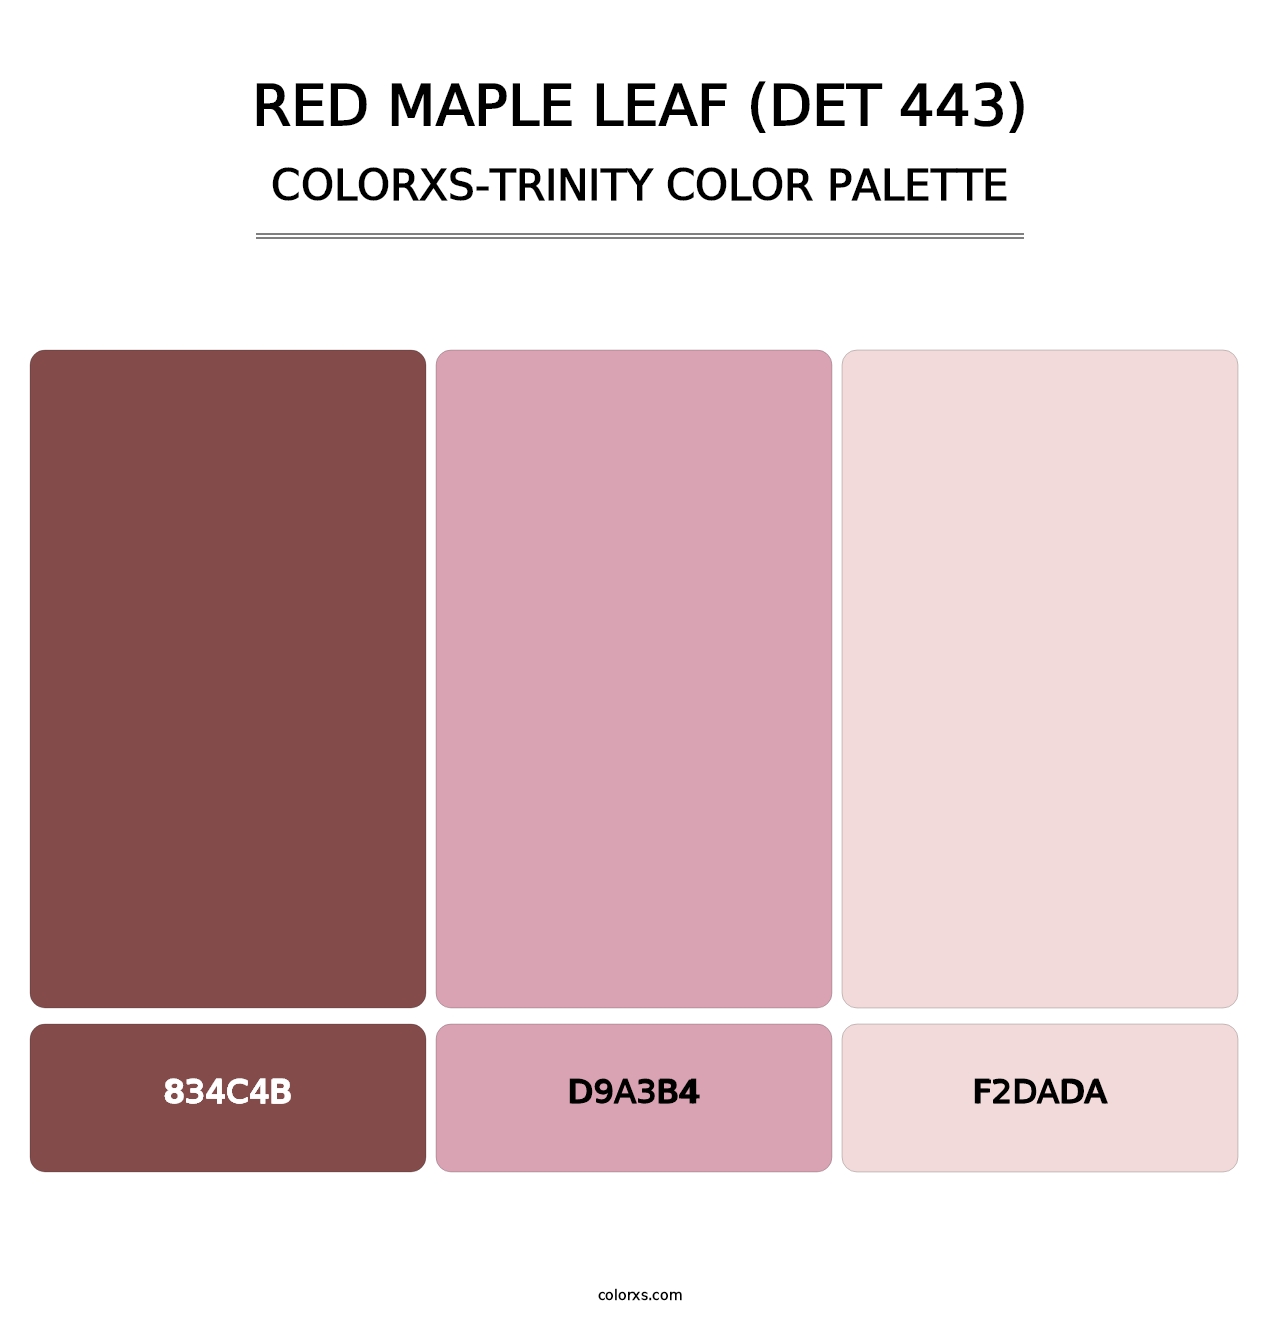 Red Maple Leaf (DET 443) - Colorxs Trinity Palette